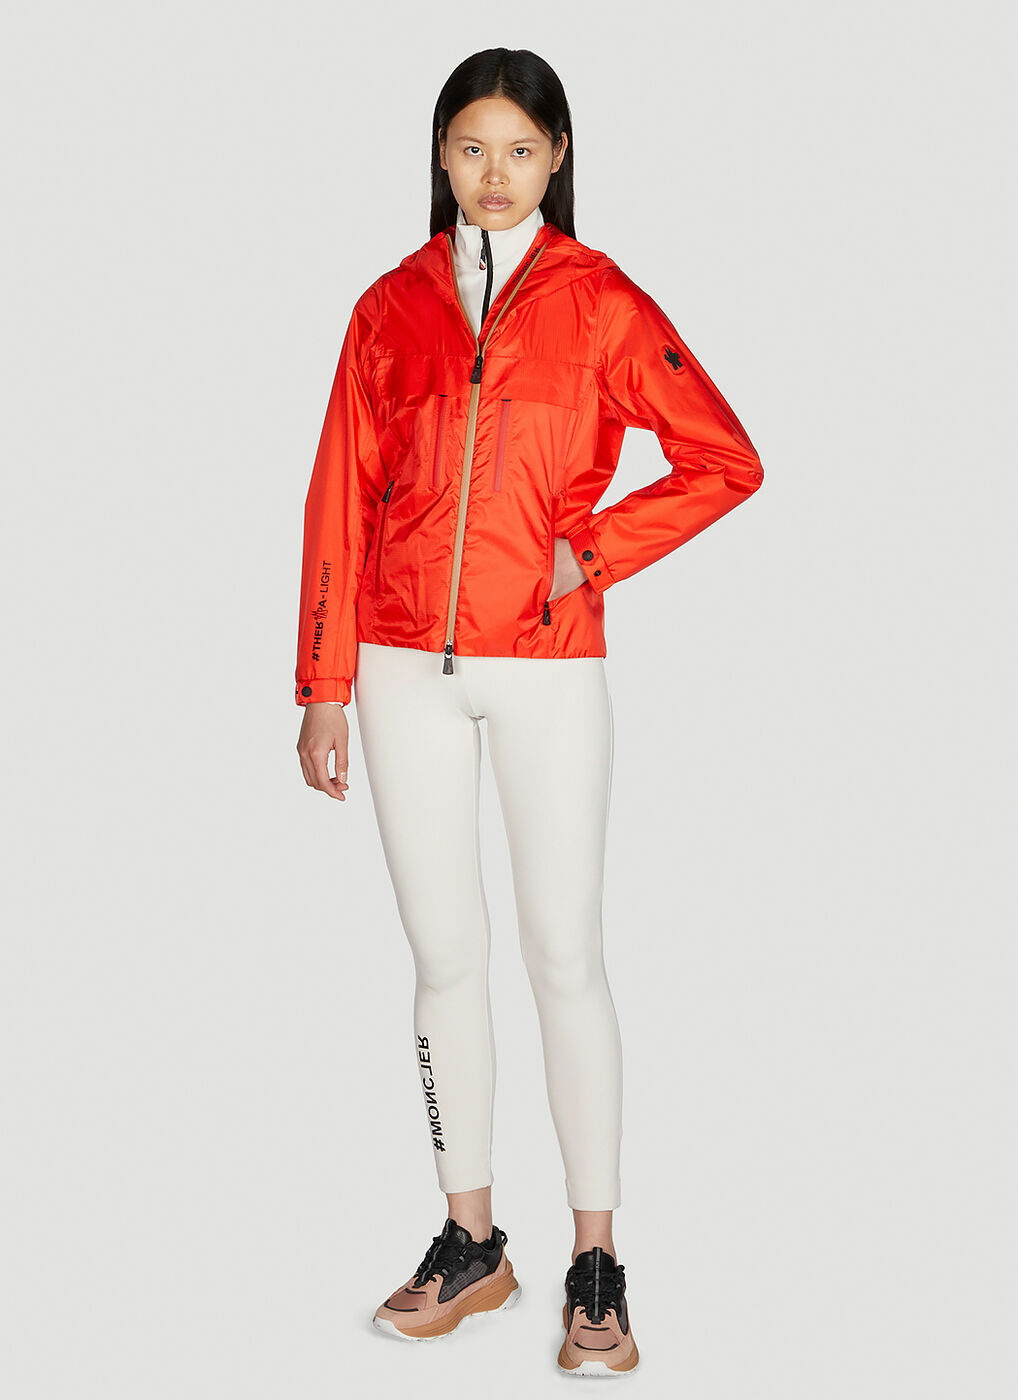 Moncler Grenoble Women's Vouvry Down Jacket - Red